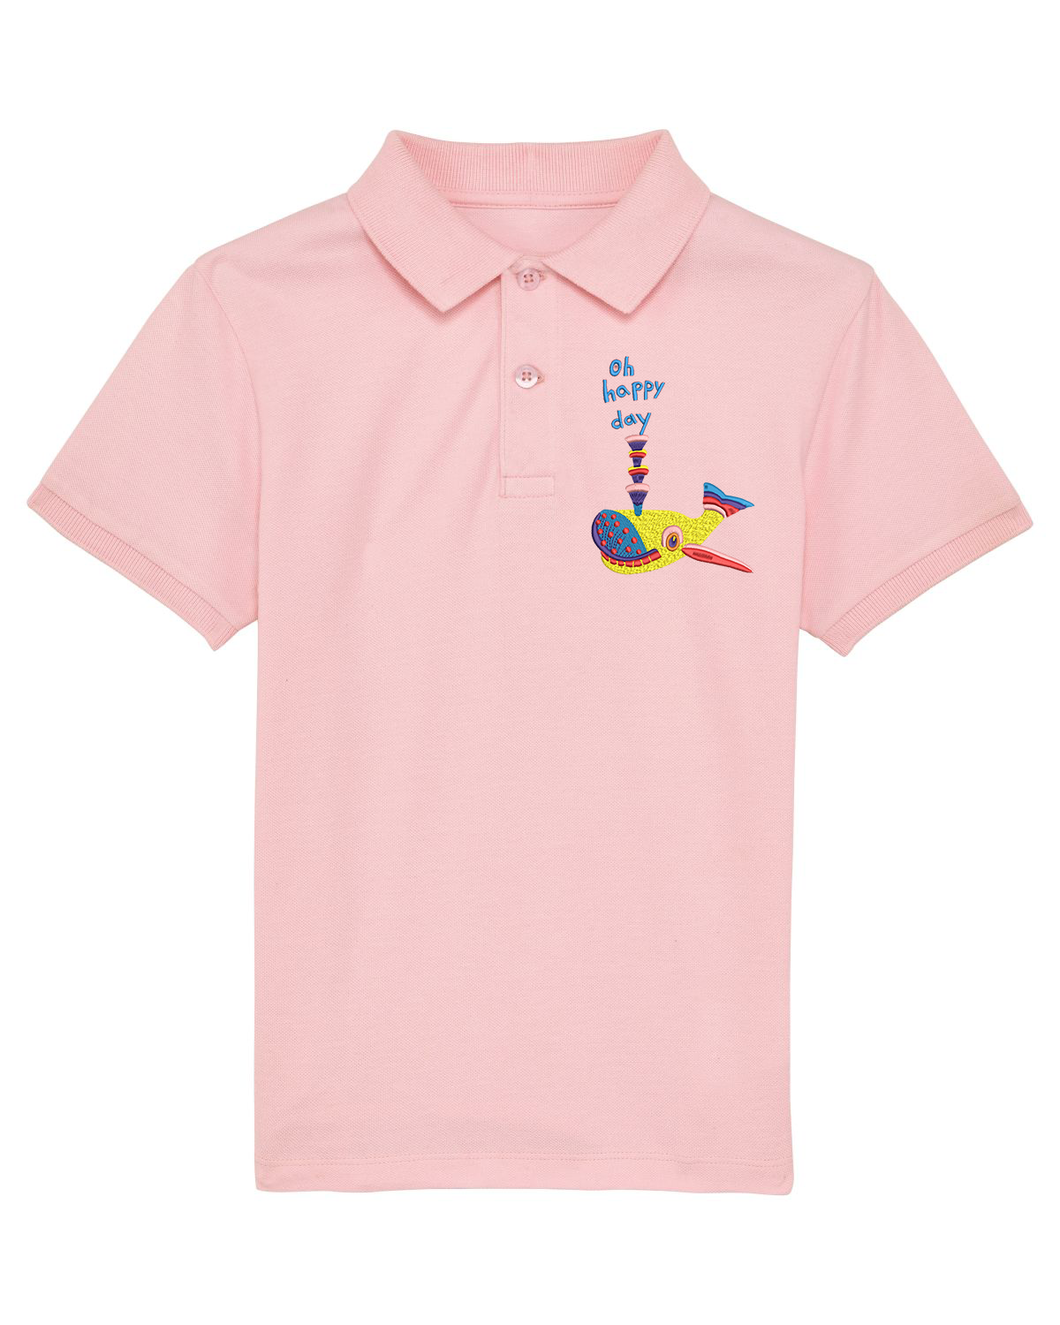 Oh happy day! 🐳 - Embroidered kids mini polo tshirt - OUTLET🔴